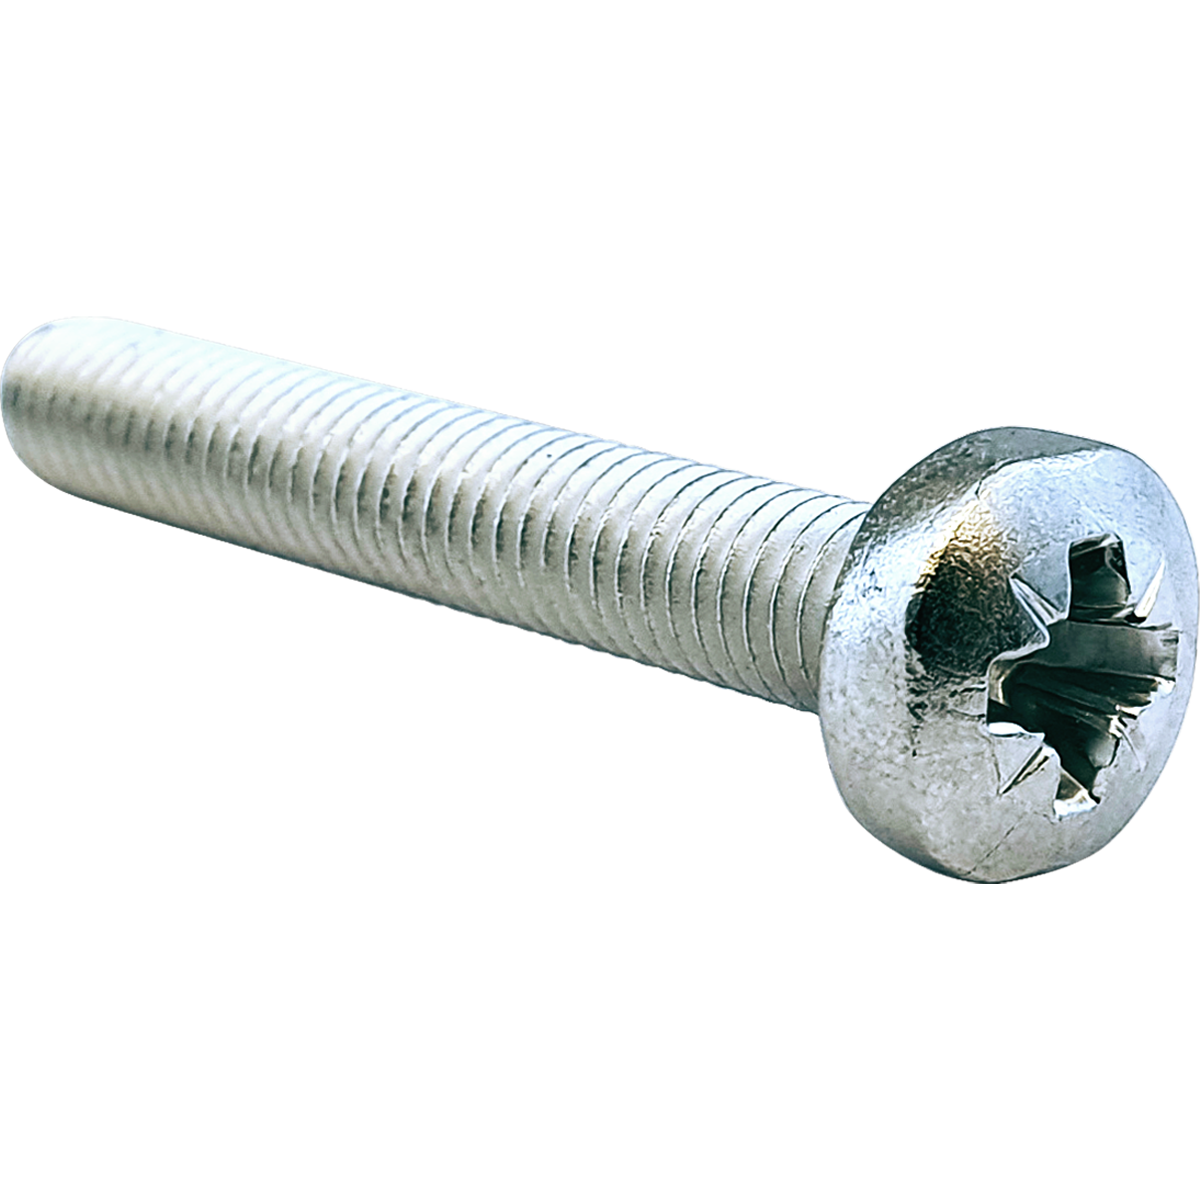 Metric, BZP, machine screws with a Pozi recess and slightly rounded pan head